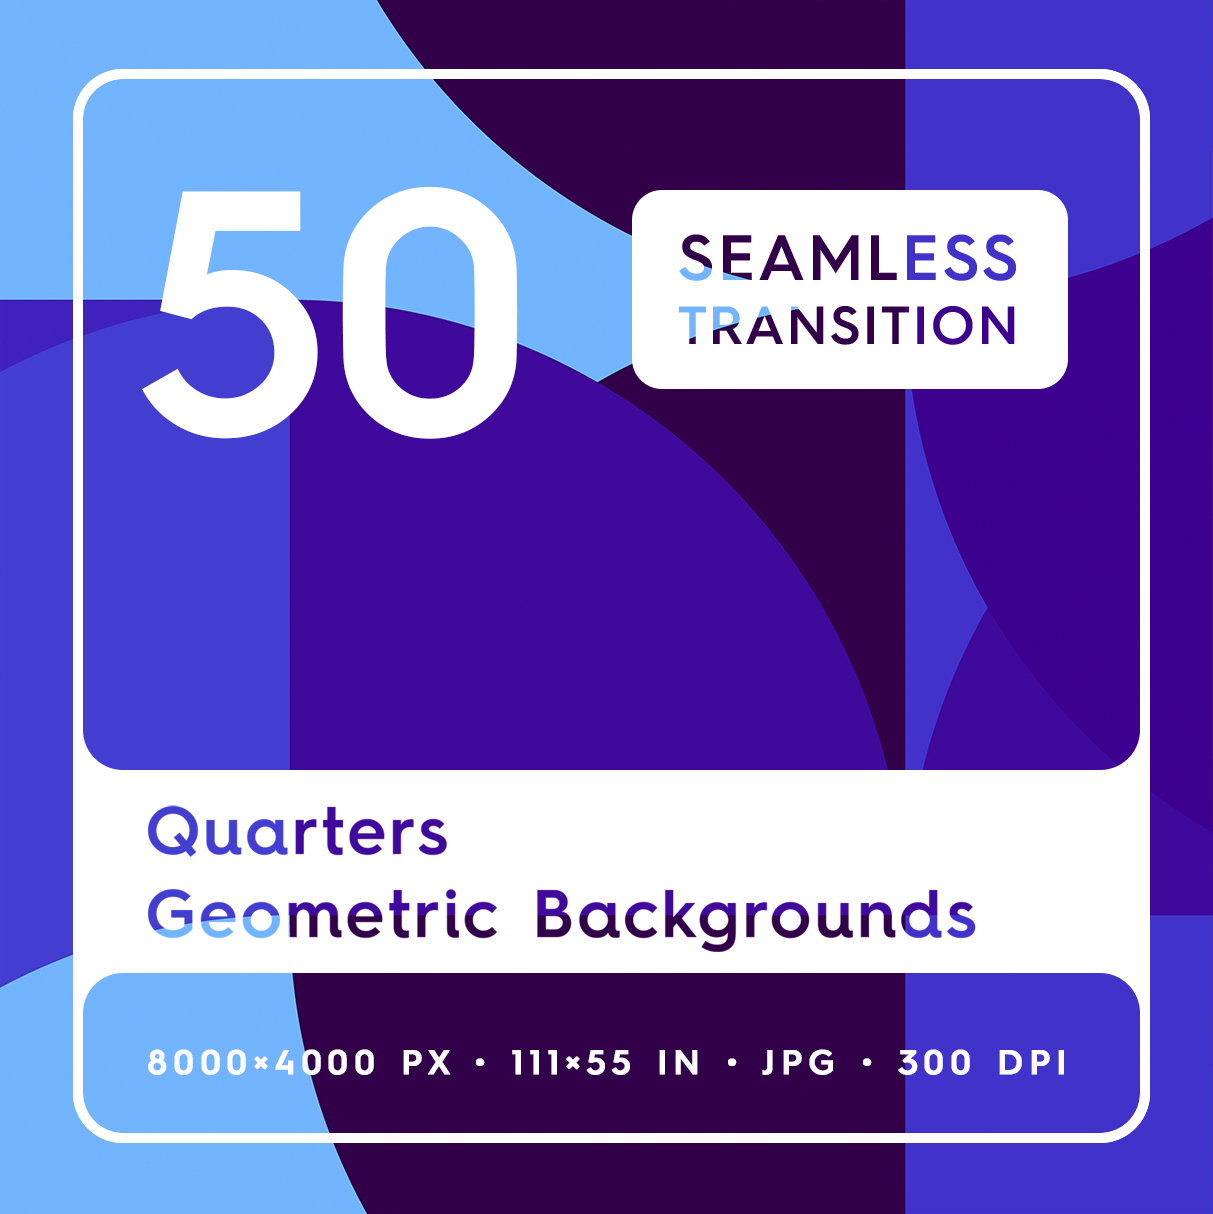 50 Quarters Geometric Backgrounds Square Cover